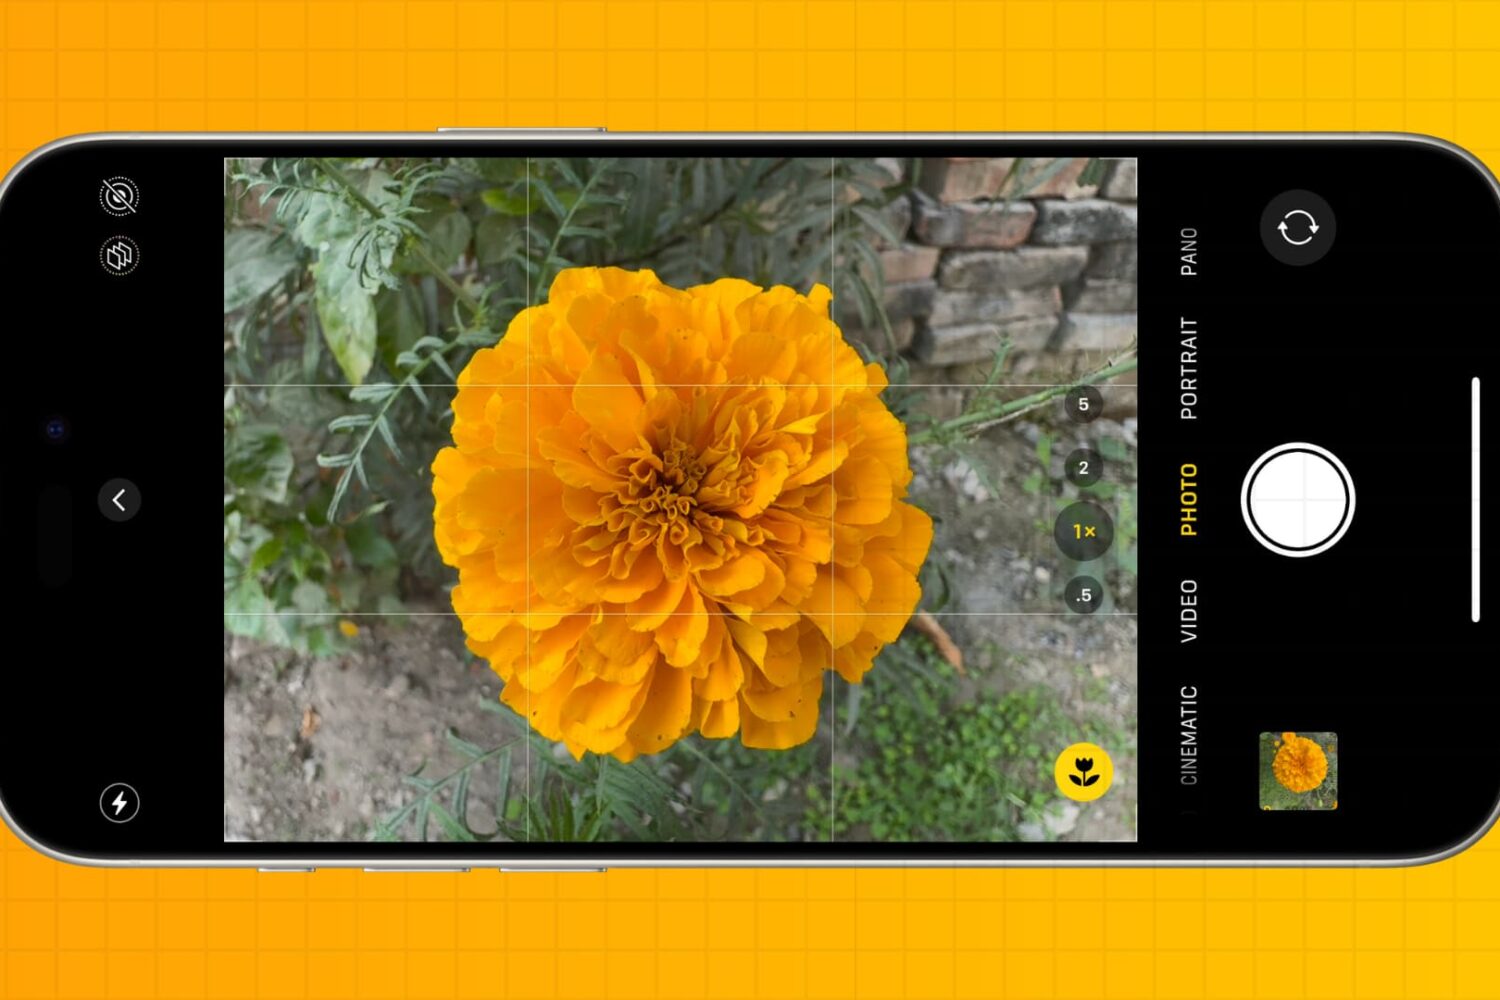 Taking photo of a yellow flower on iPhone